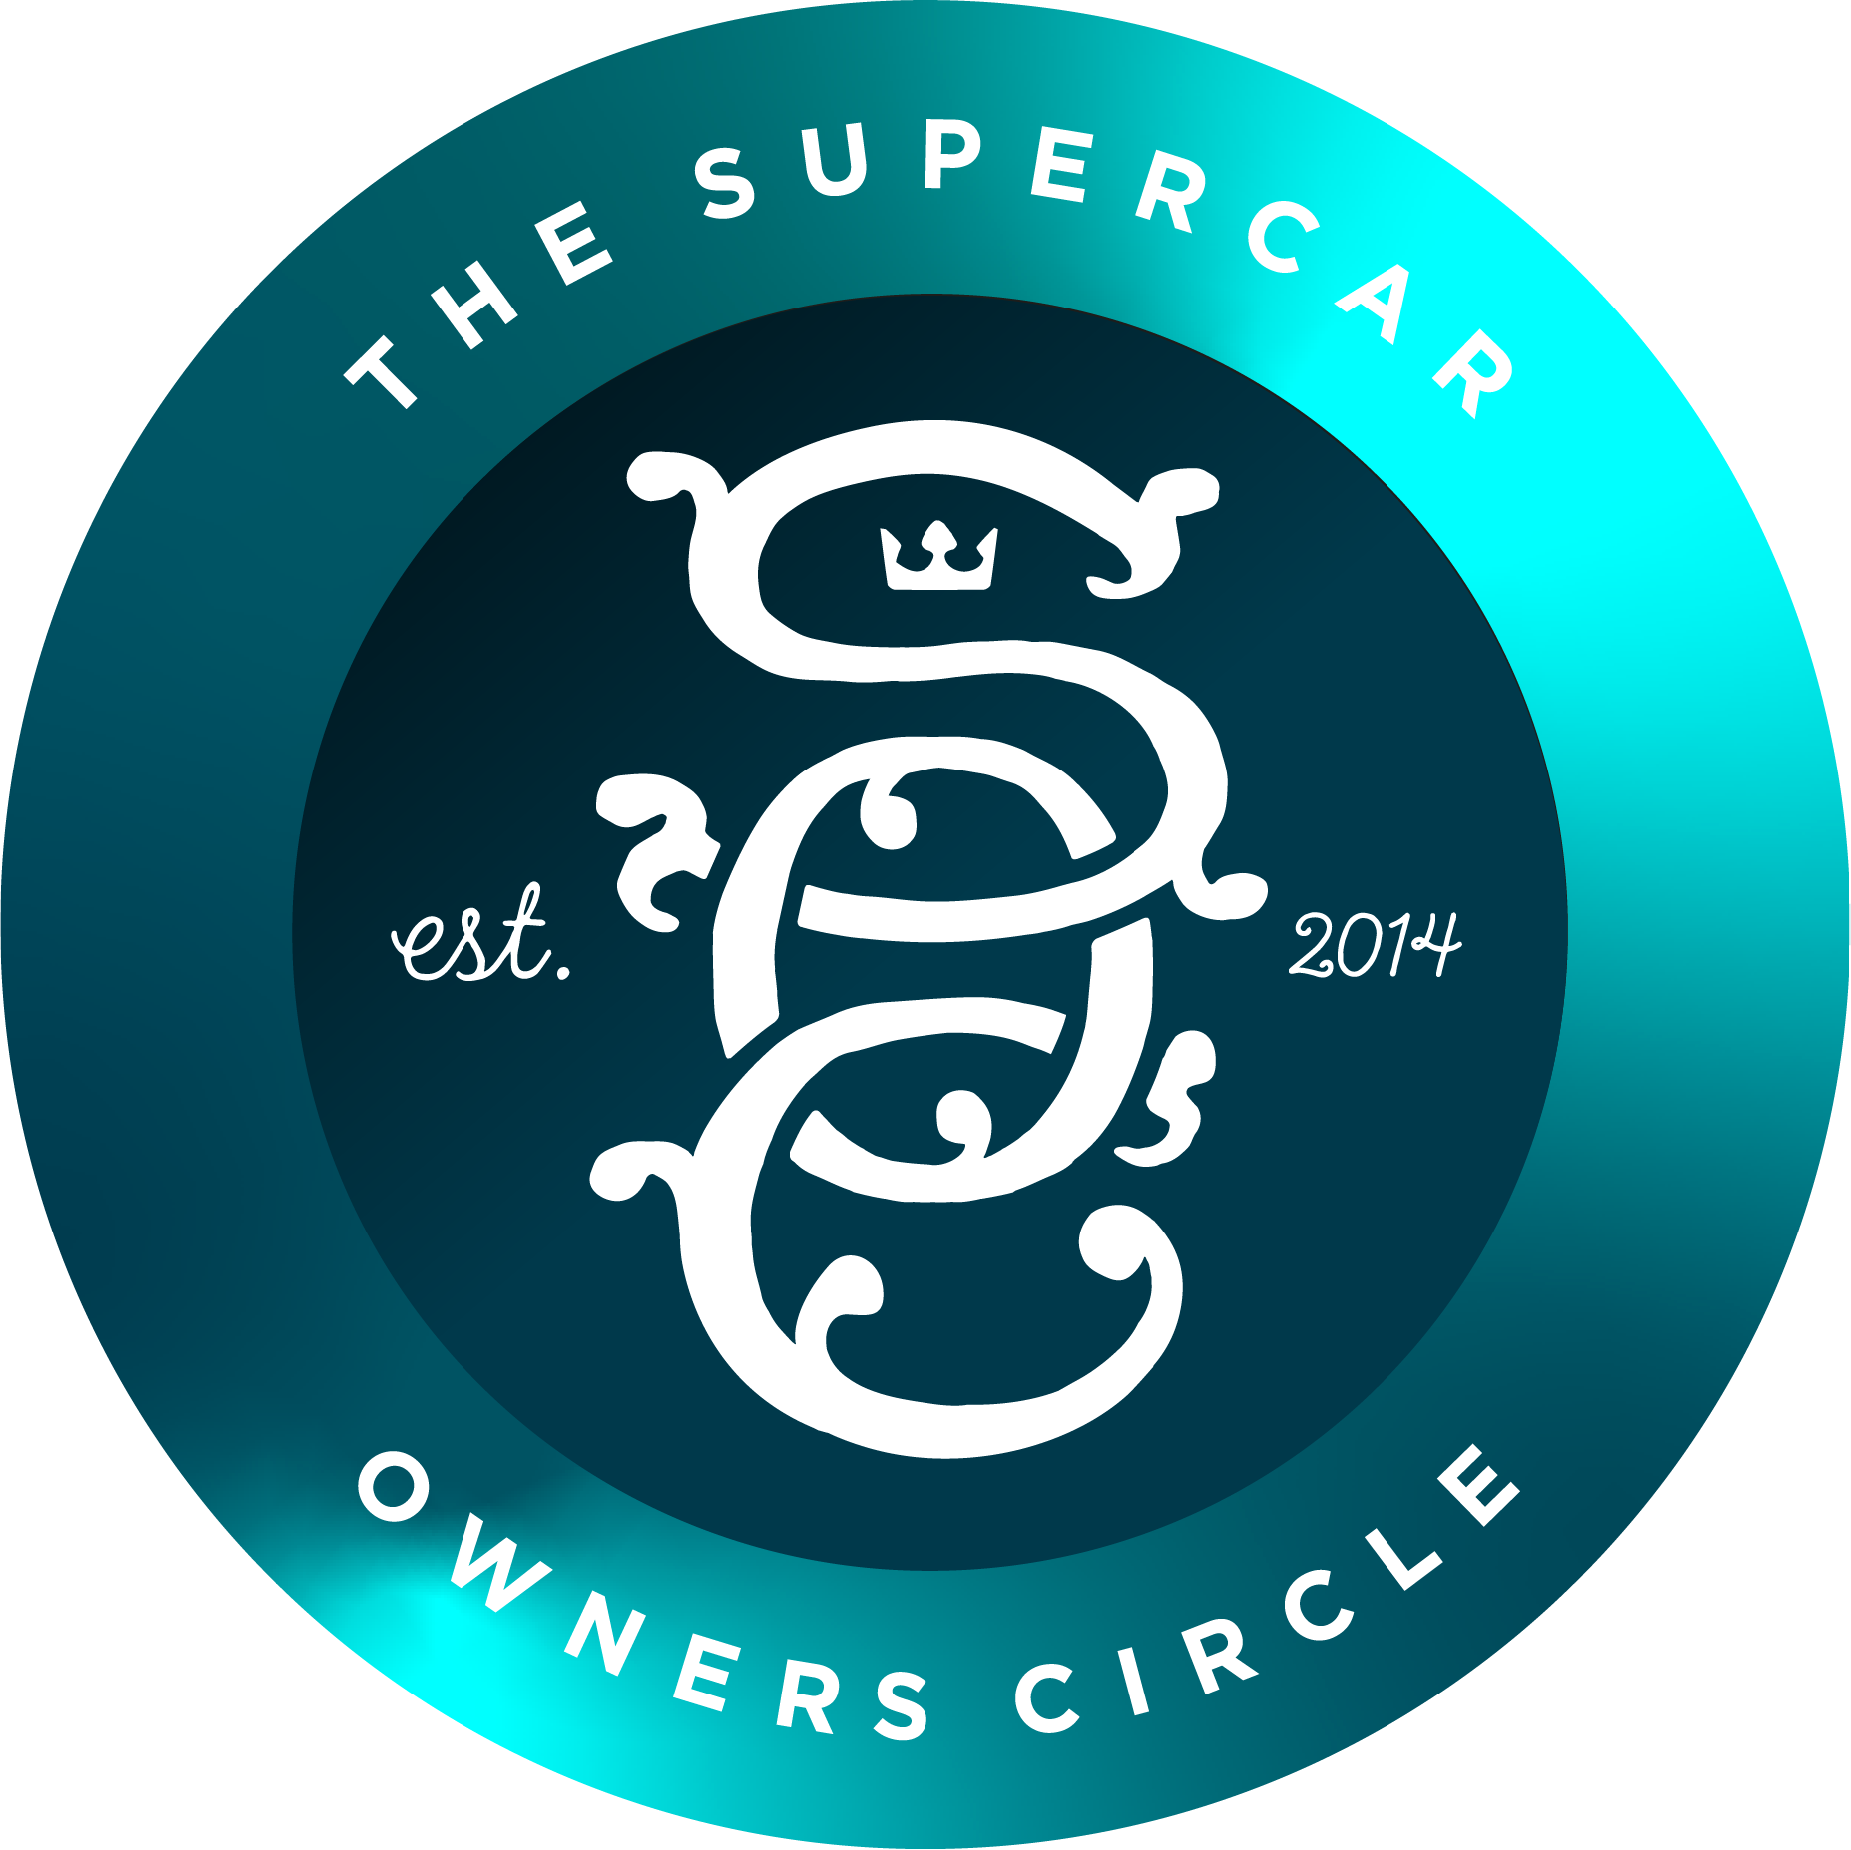 THE SUPERCAR OWNERS CIRCLE